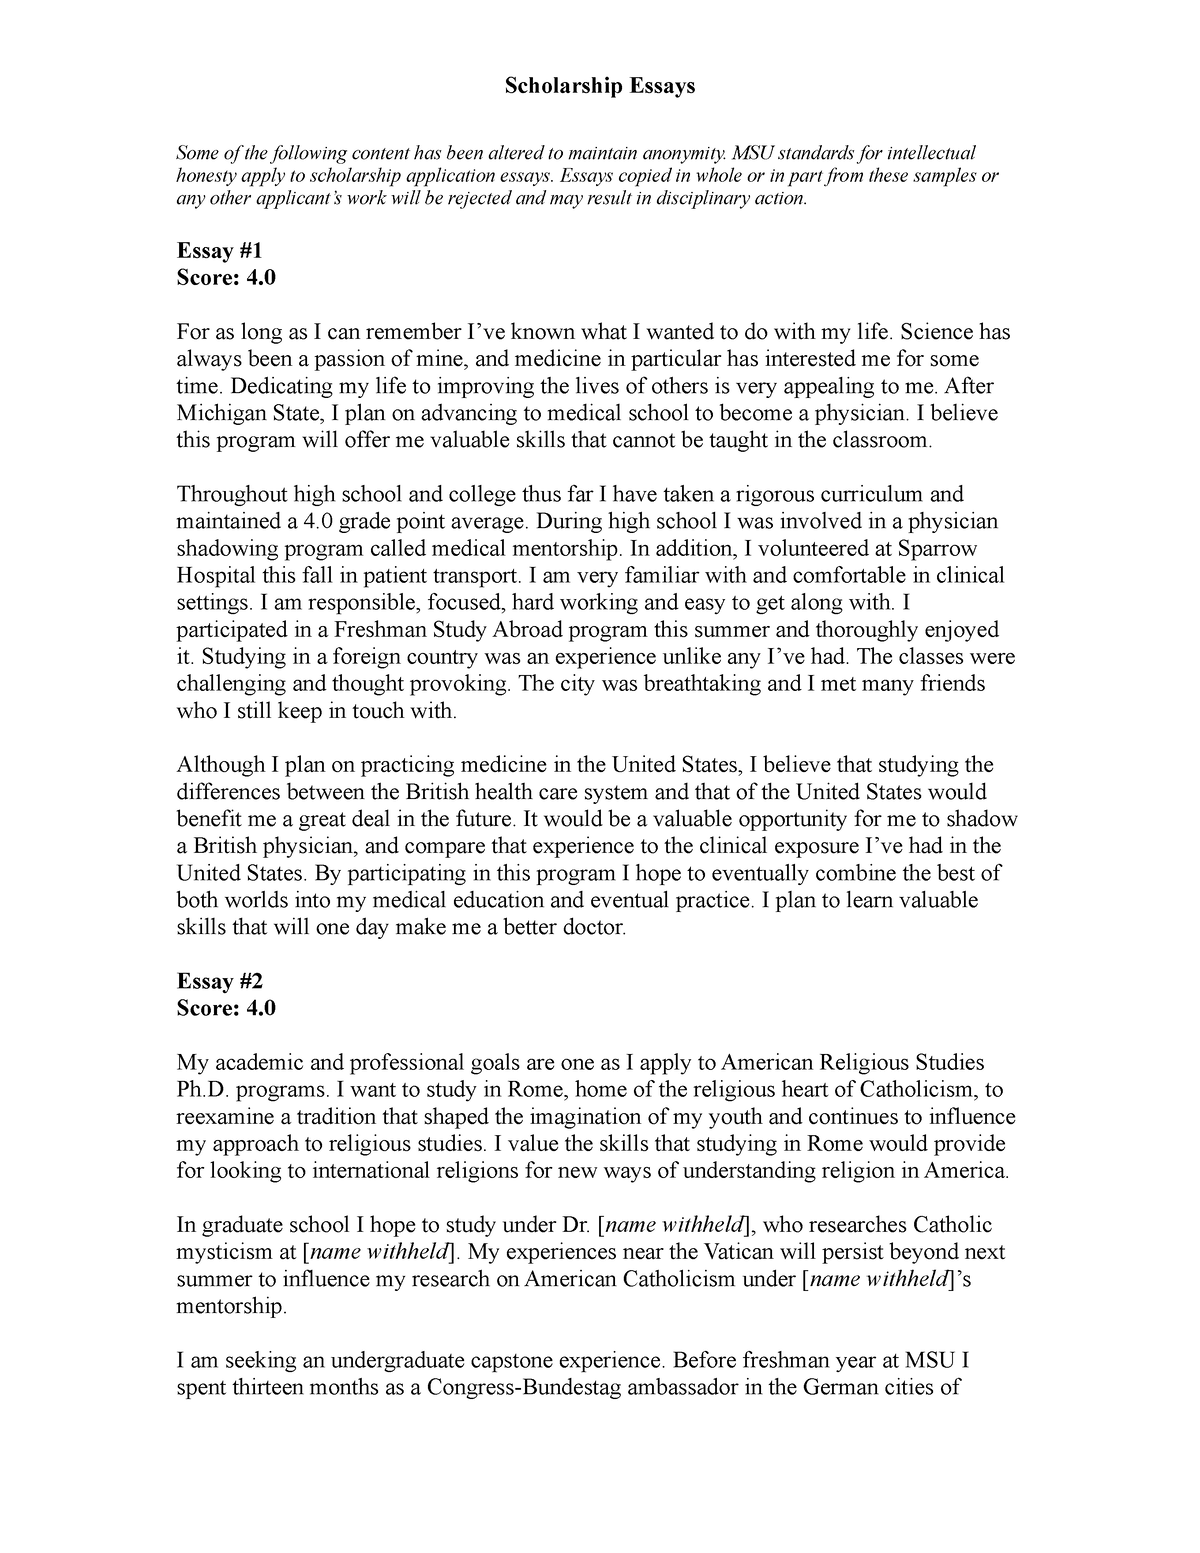 College Scholarship Grade 4/4 Scholarship Essays Some of the